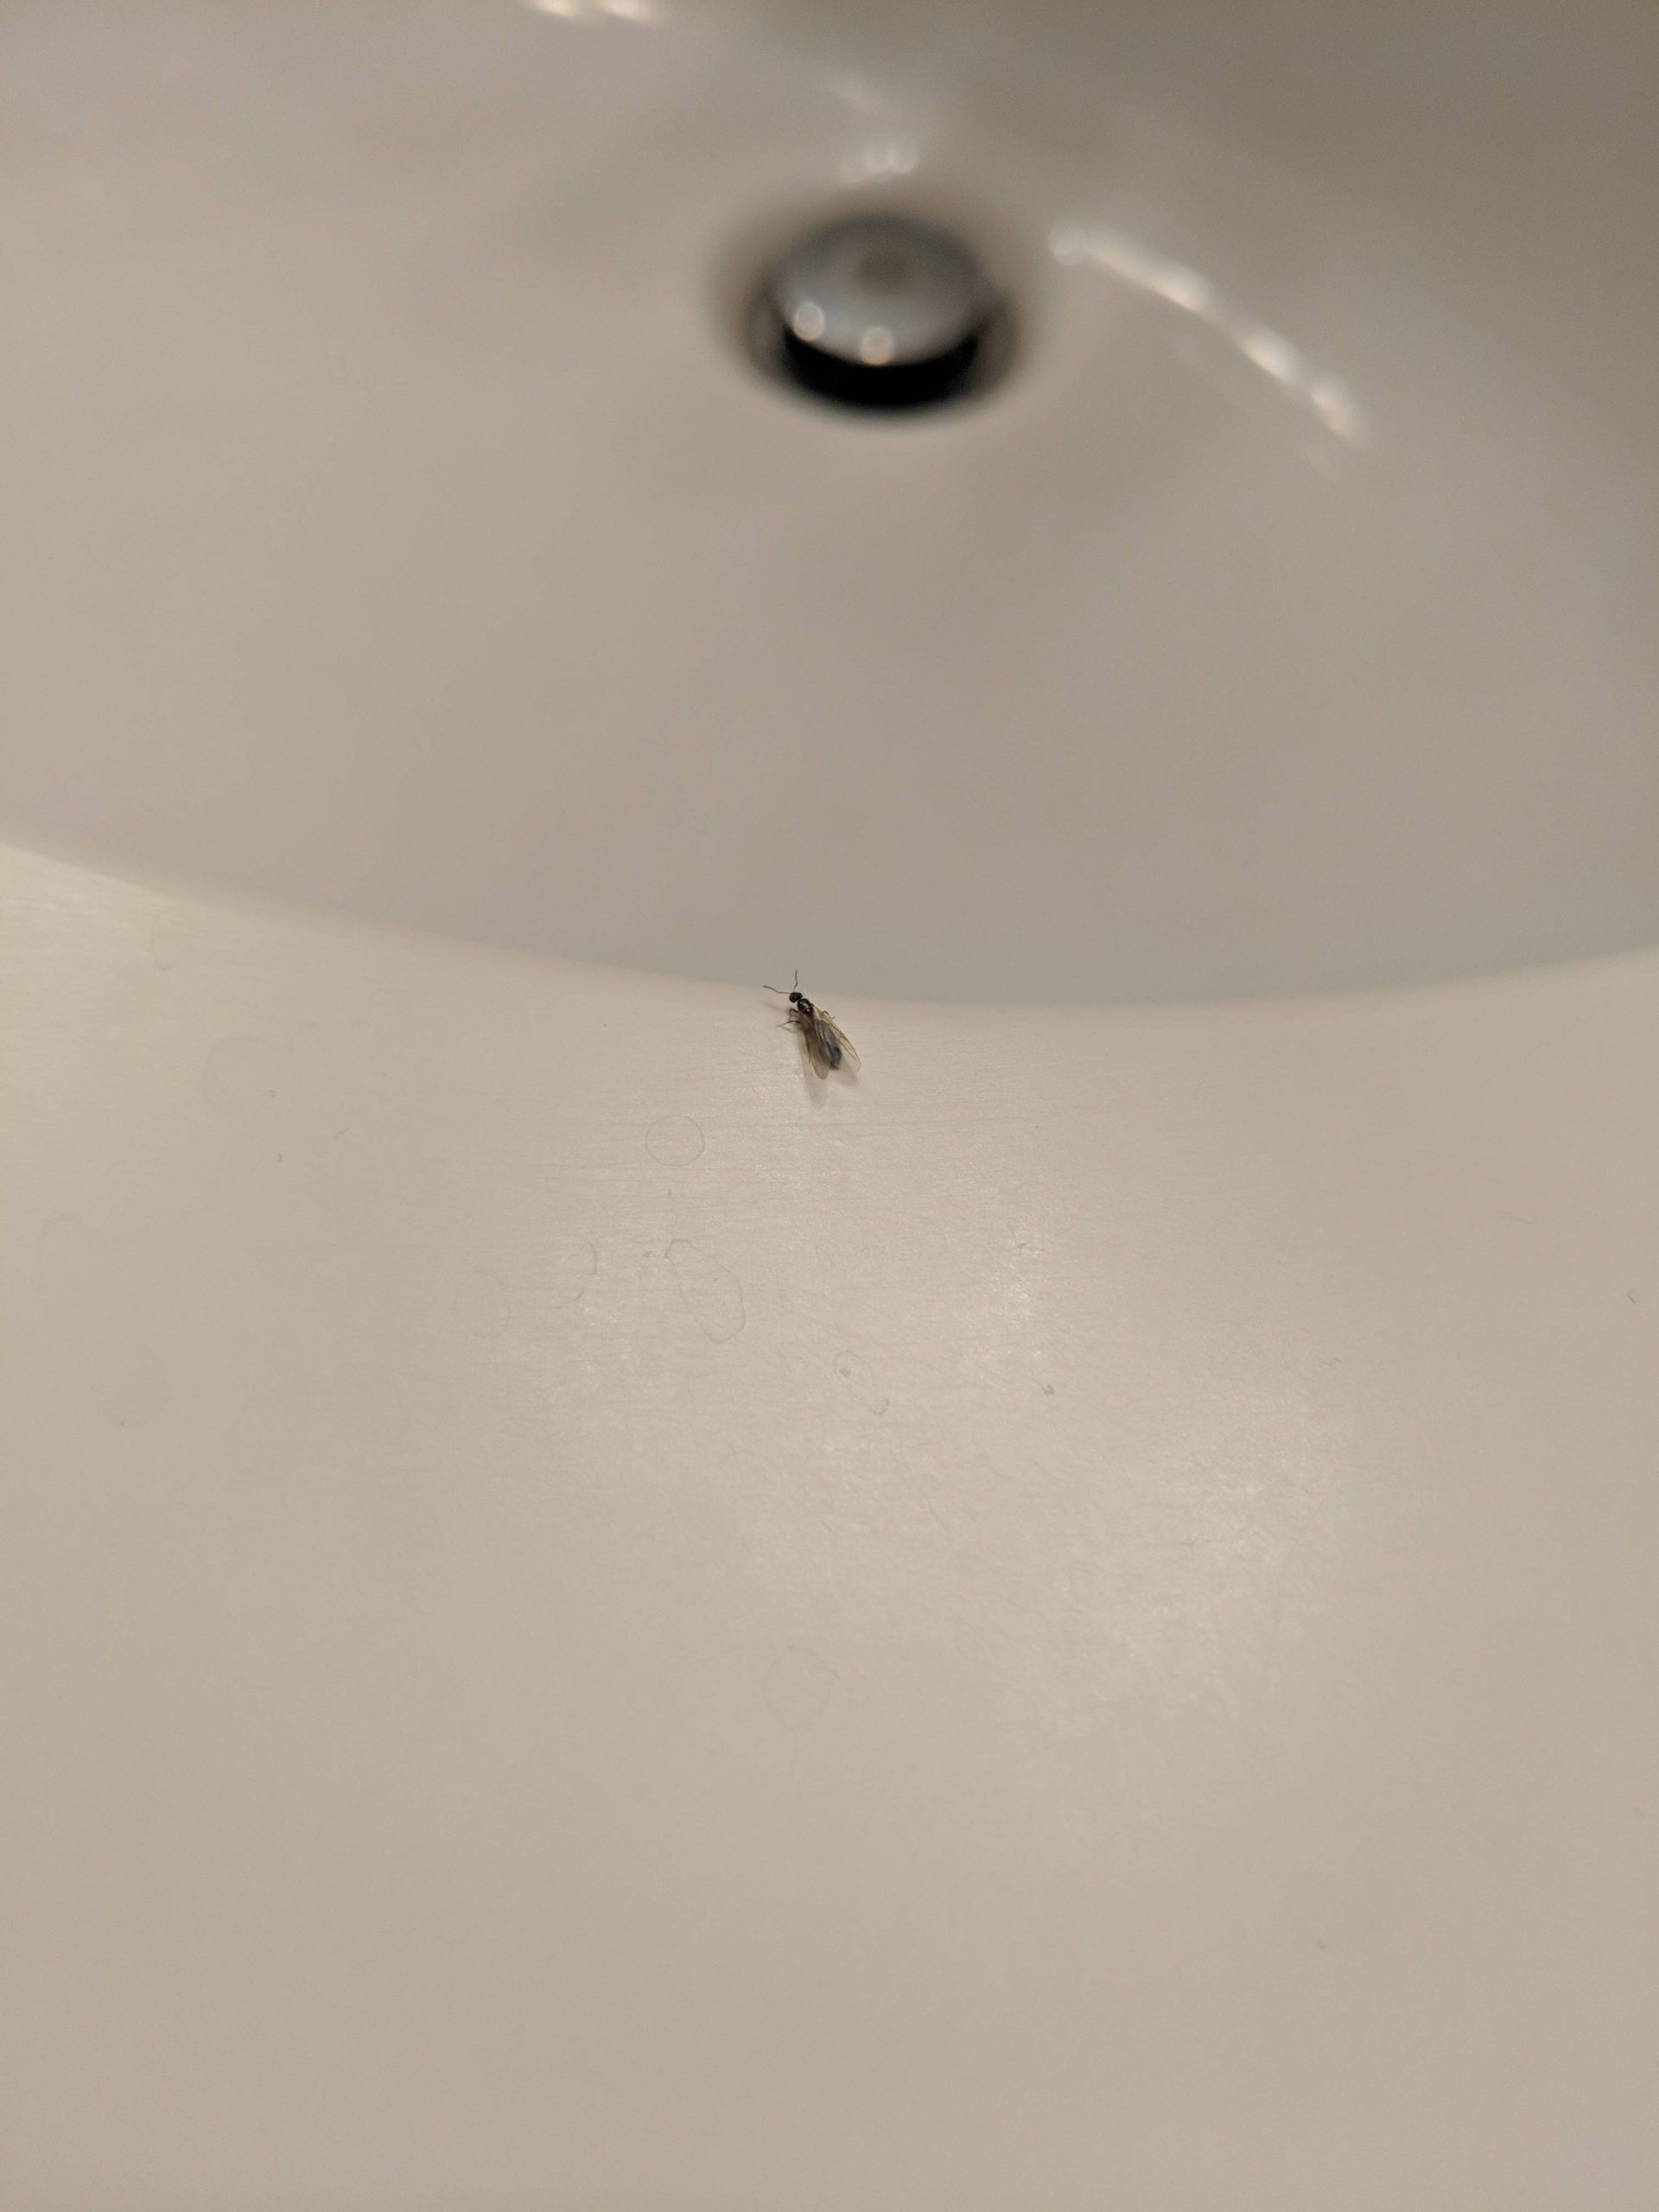 Pests Infestation In Bathroom Identification And with dimensions 3024 X 4032